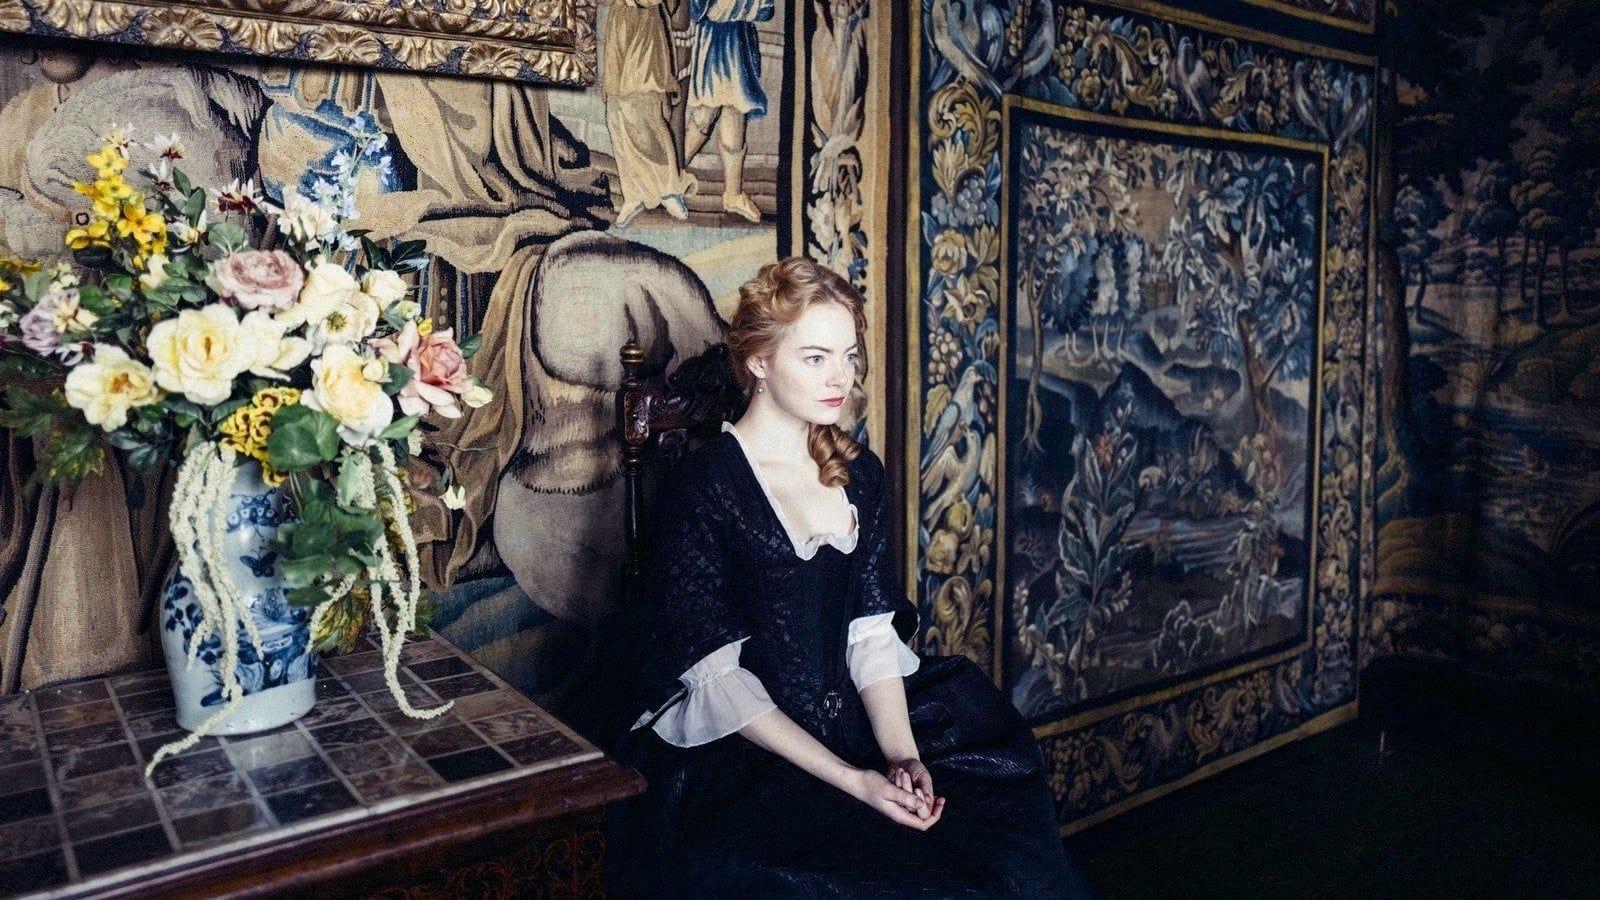 Quirky Female Costuming Shapes The Favourite and Mary Poppins